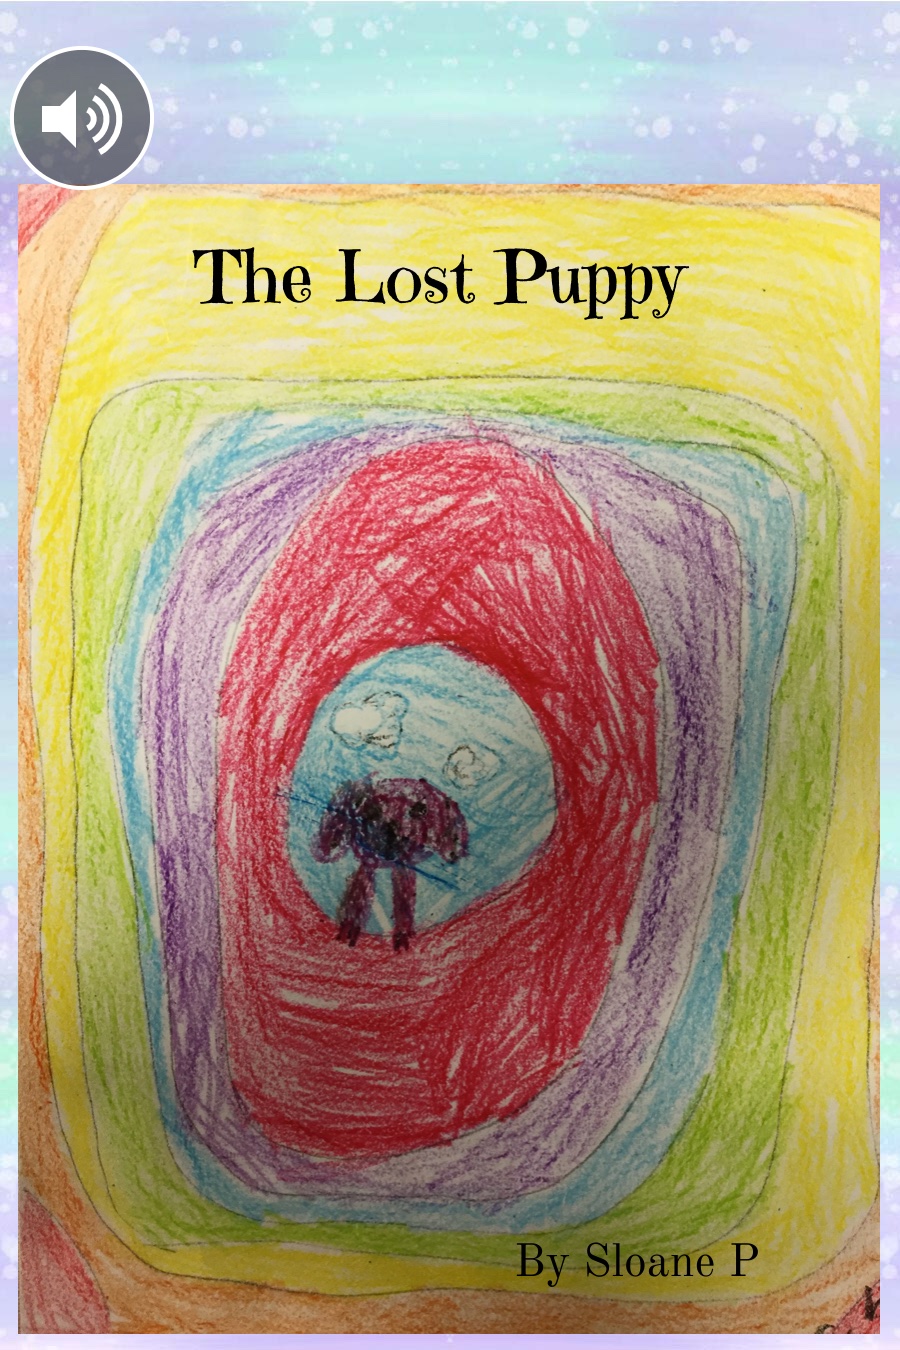 The Lost Puppy by Sloane P